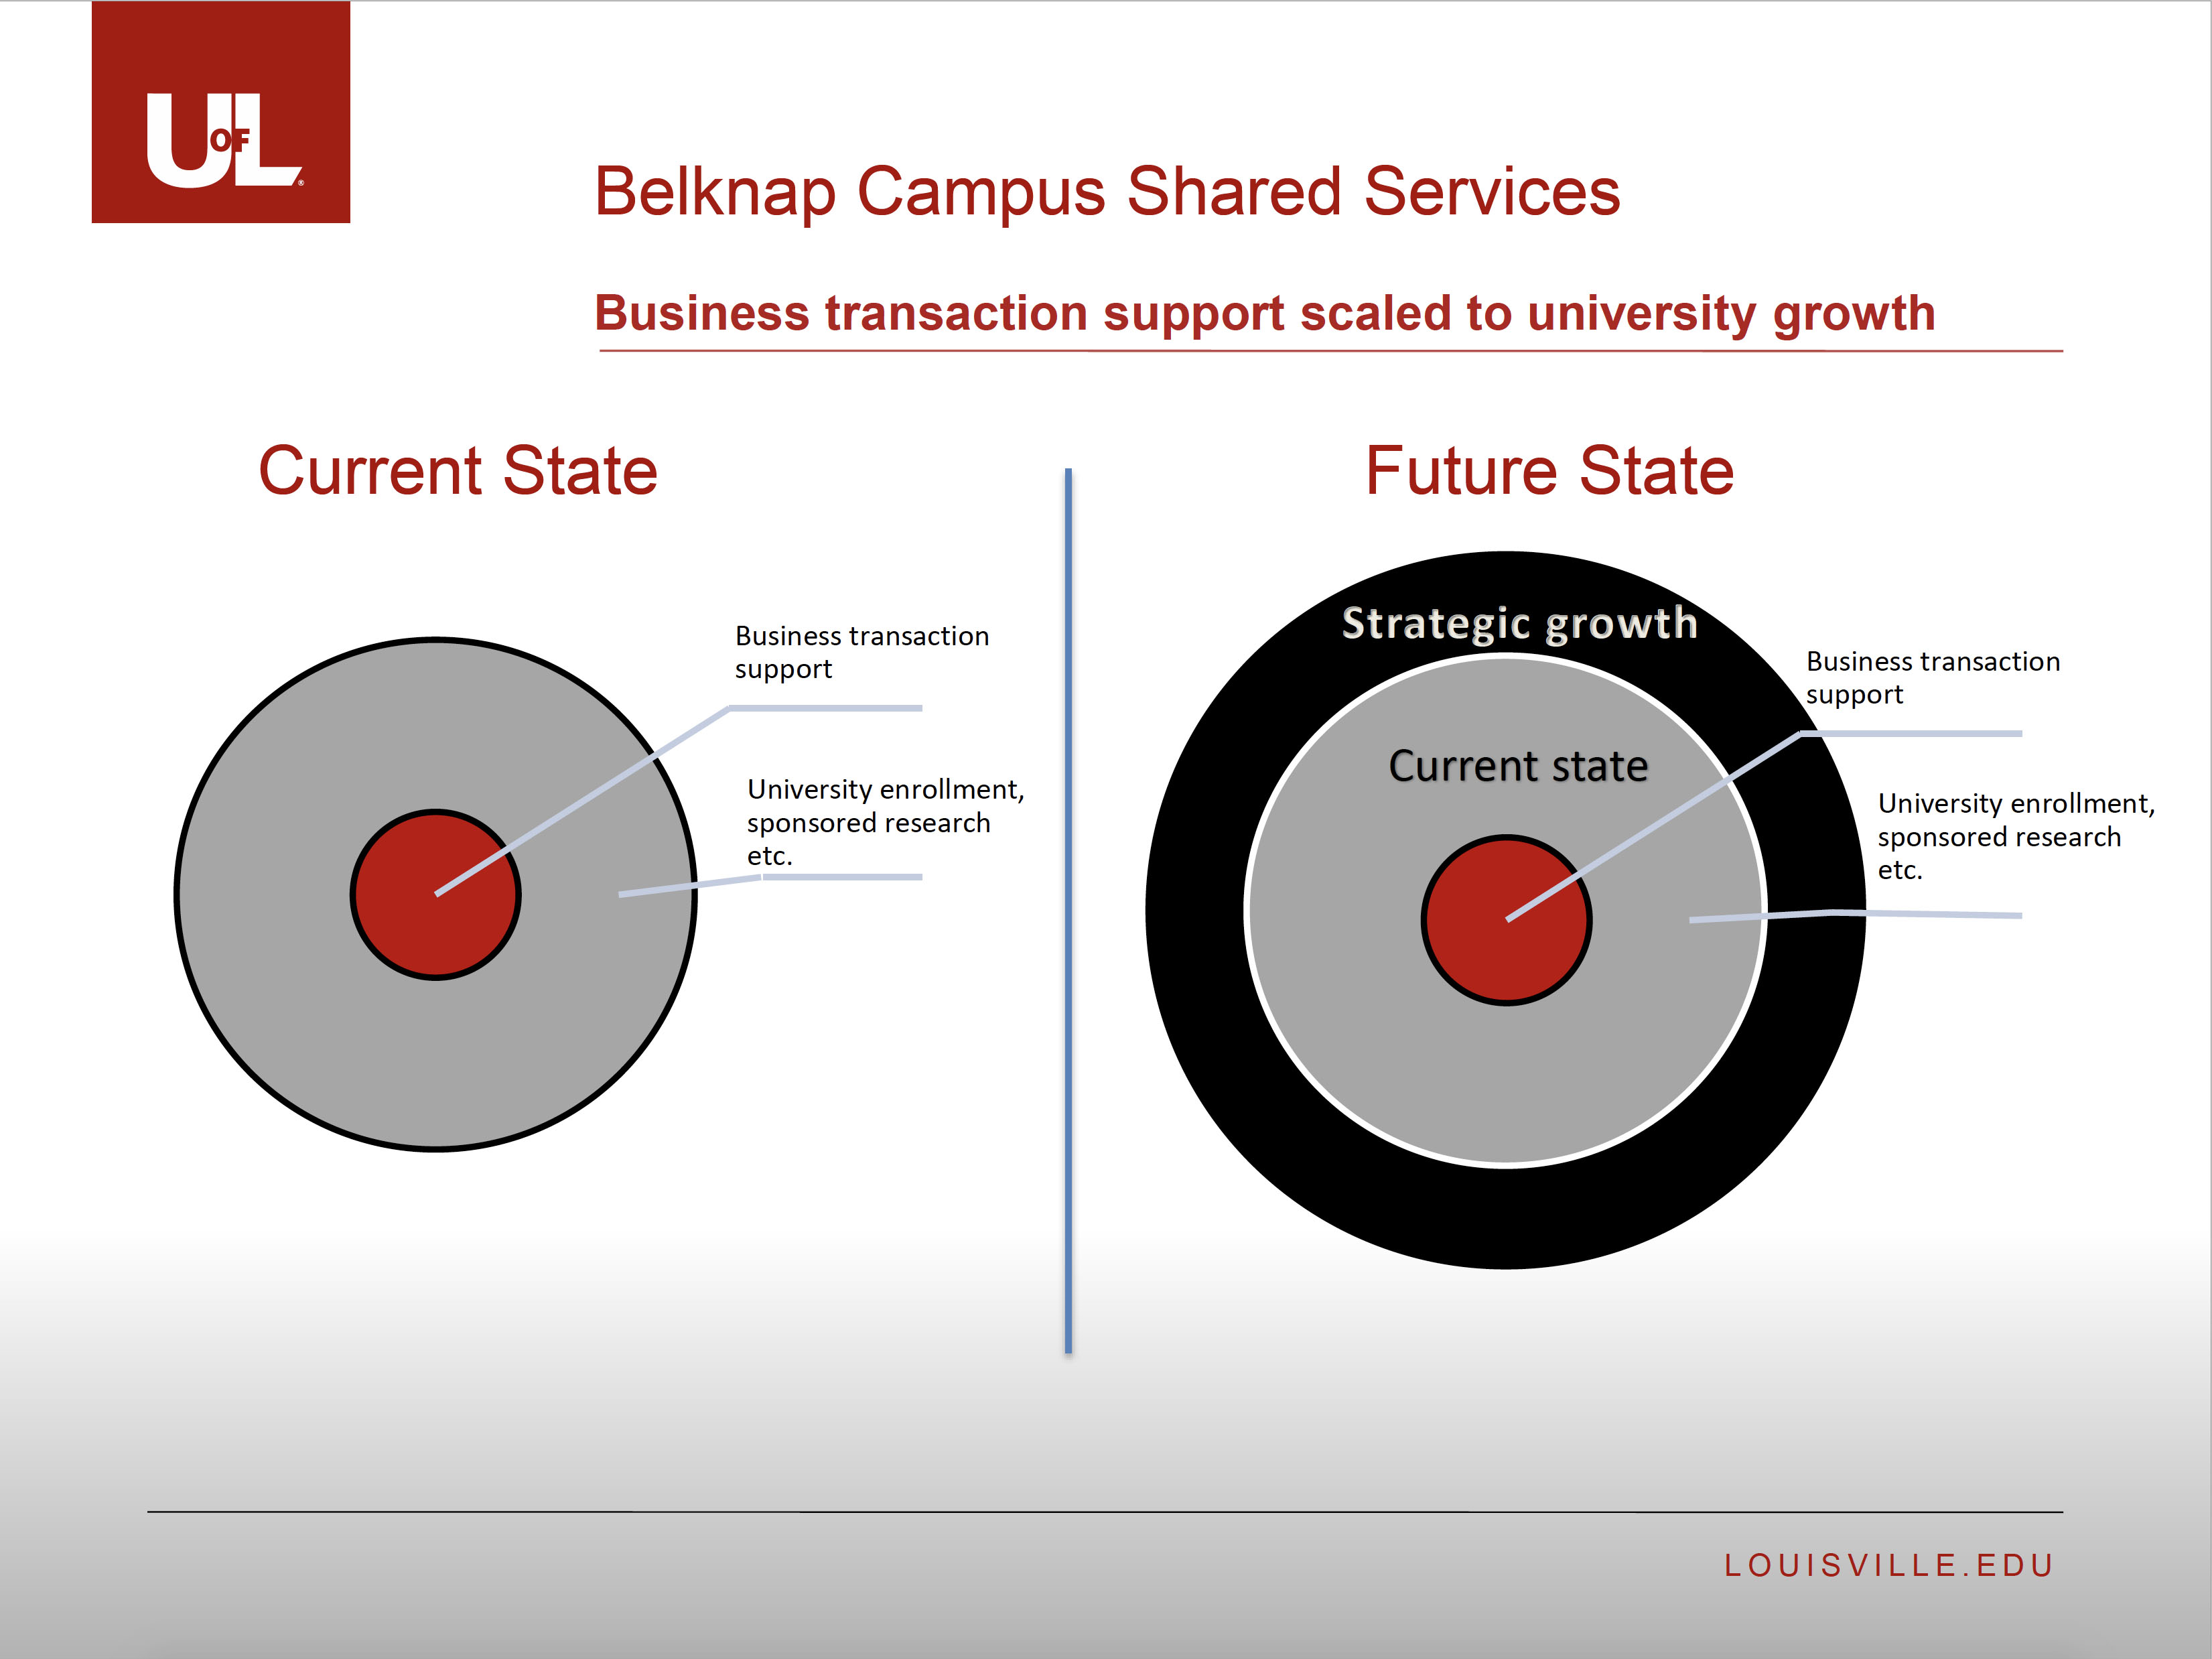 The shared services business model is scaled to support UofL's growth.